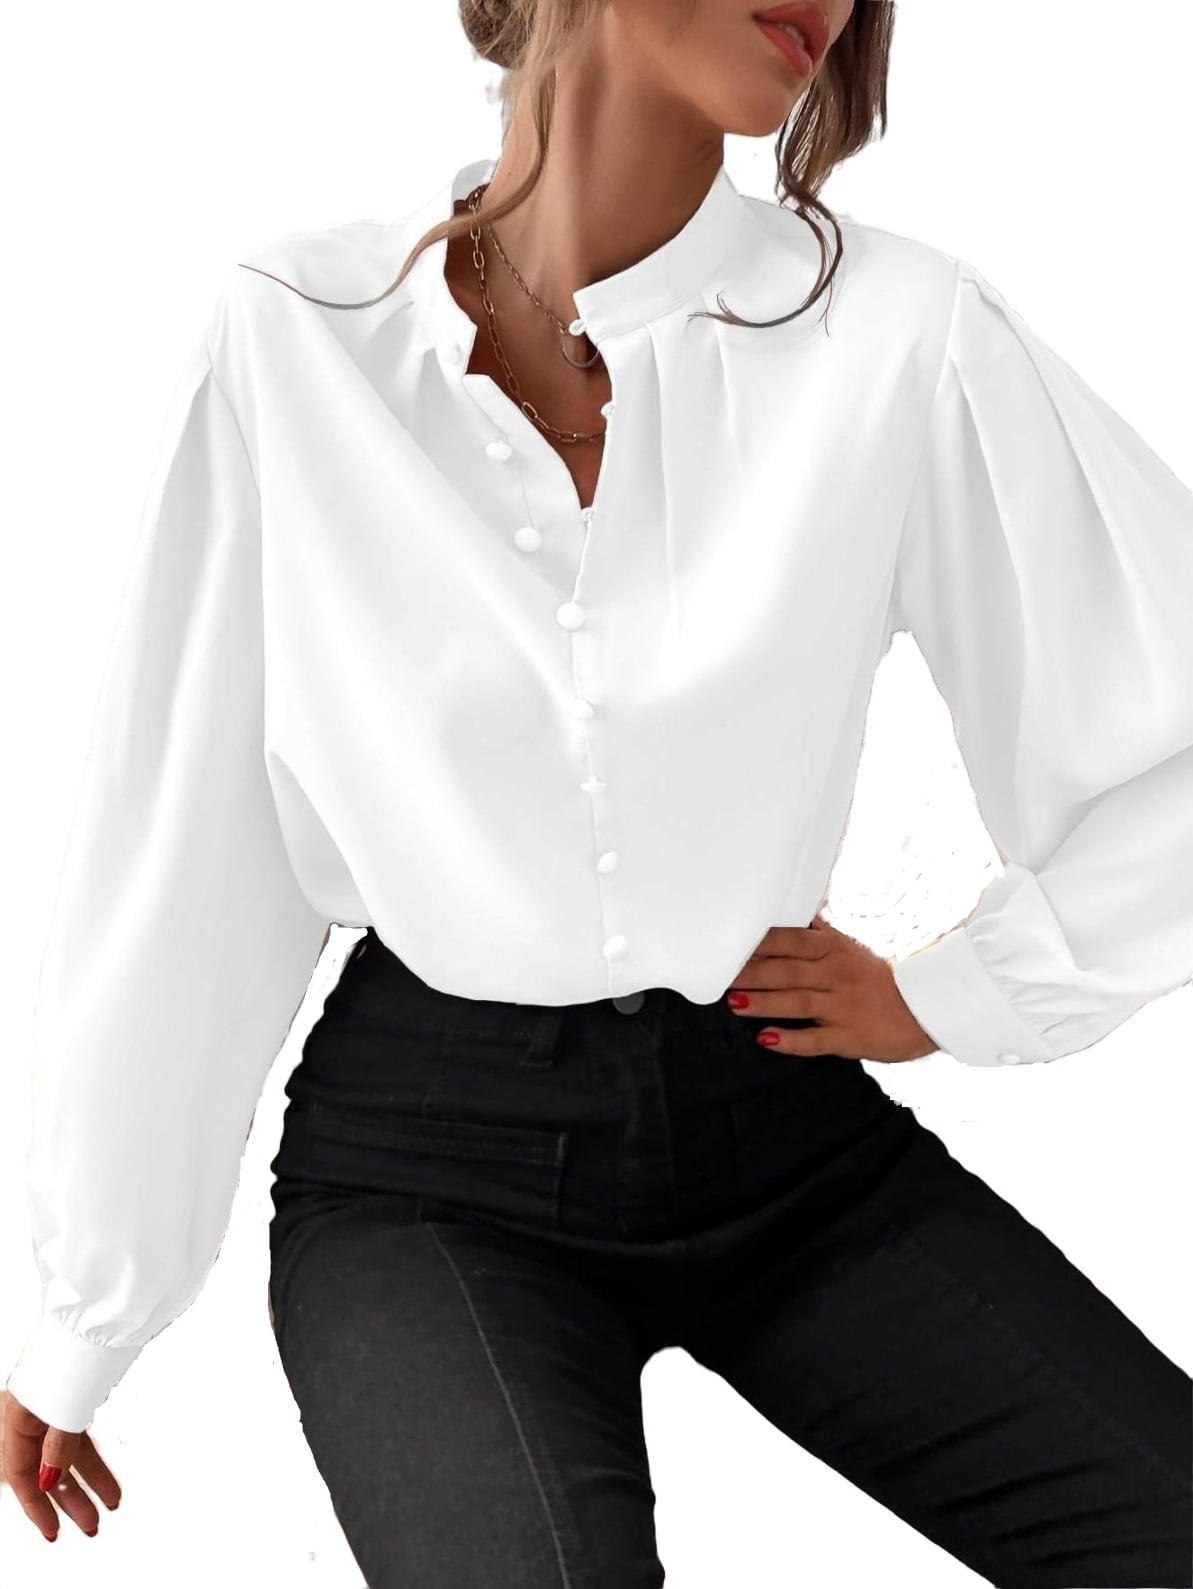 Women's Blouses Elegant Plain Top Stand Collar Fake Buttons Long Sleeve  White S